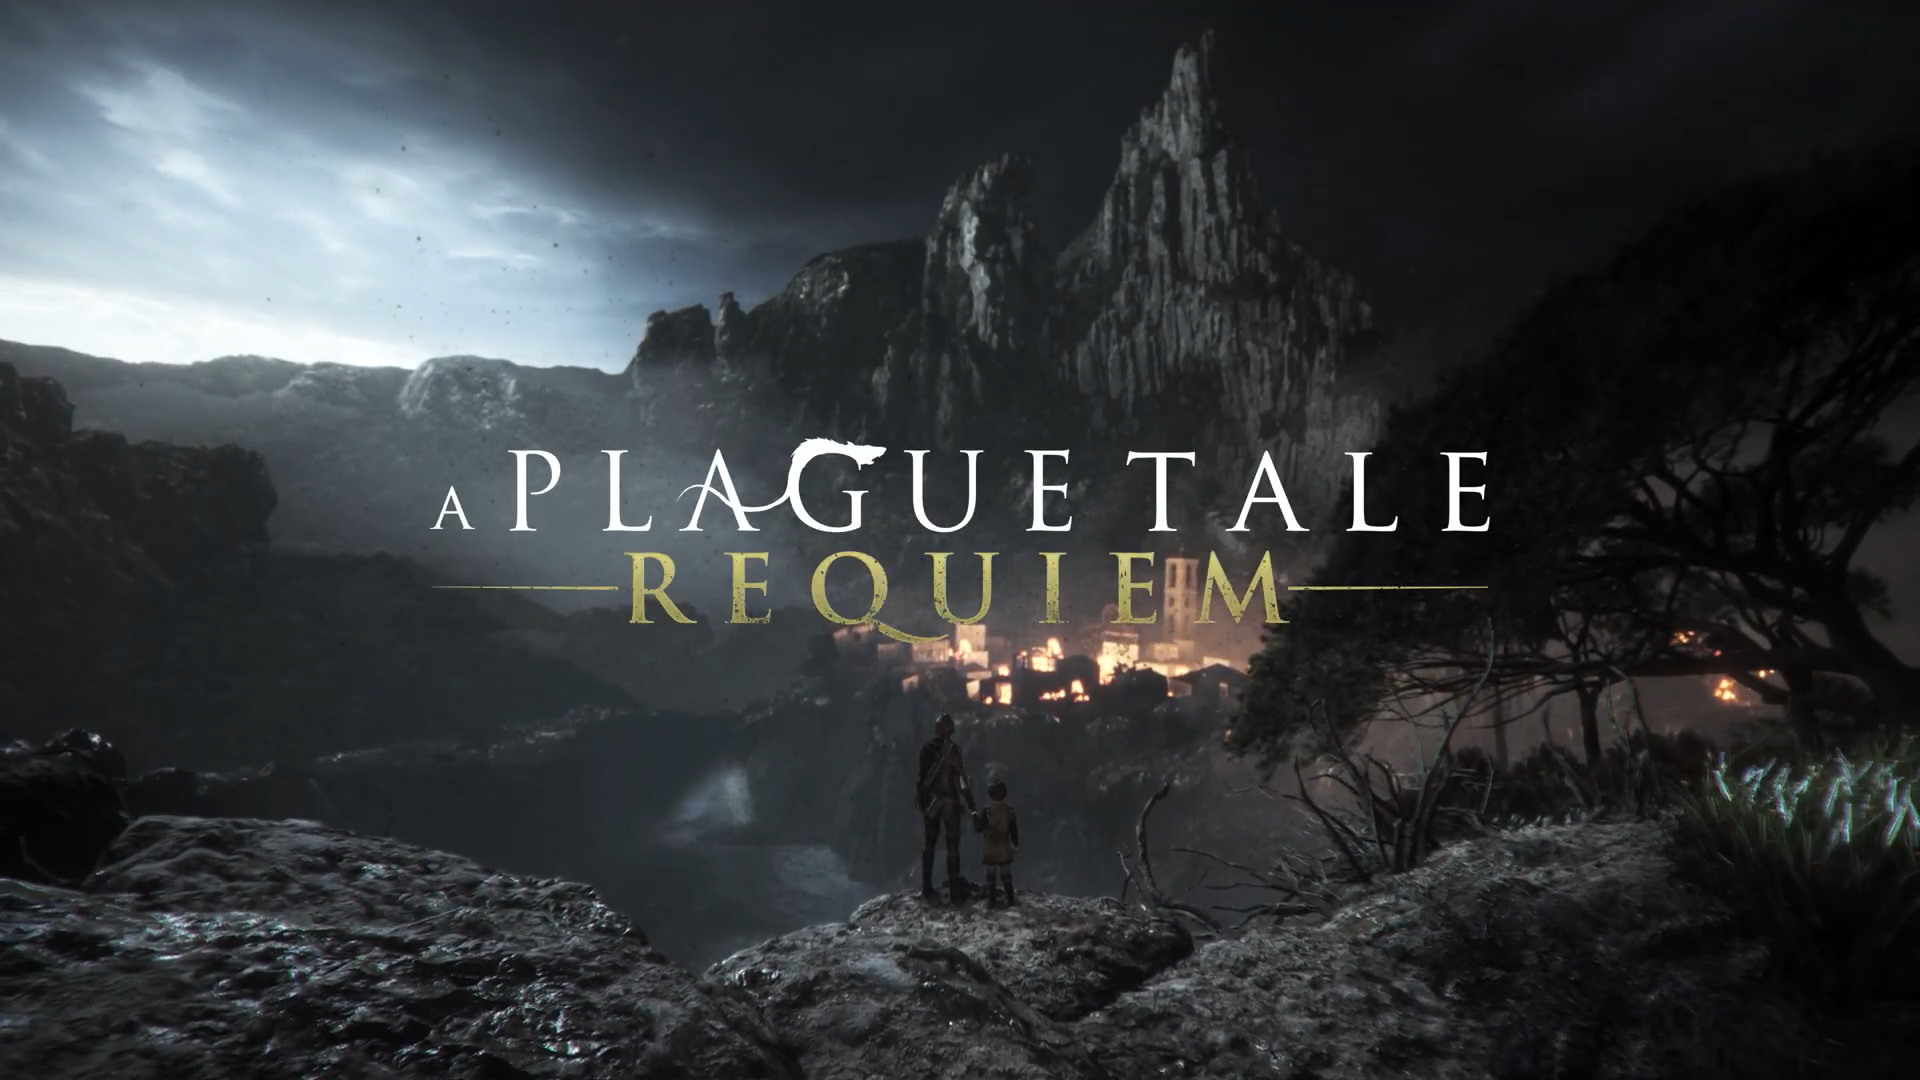 Powering the Astounding Journey of A Plague Tale: Requiem with Xbox Series  X